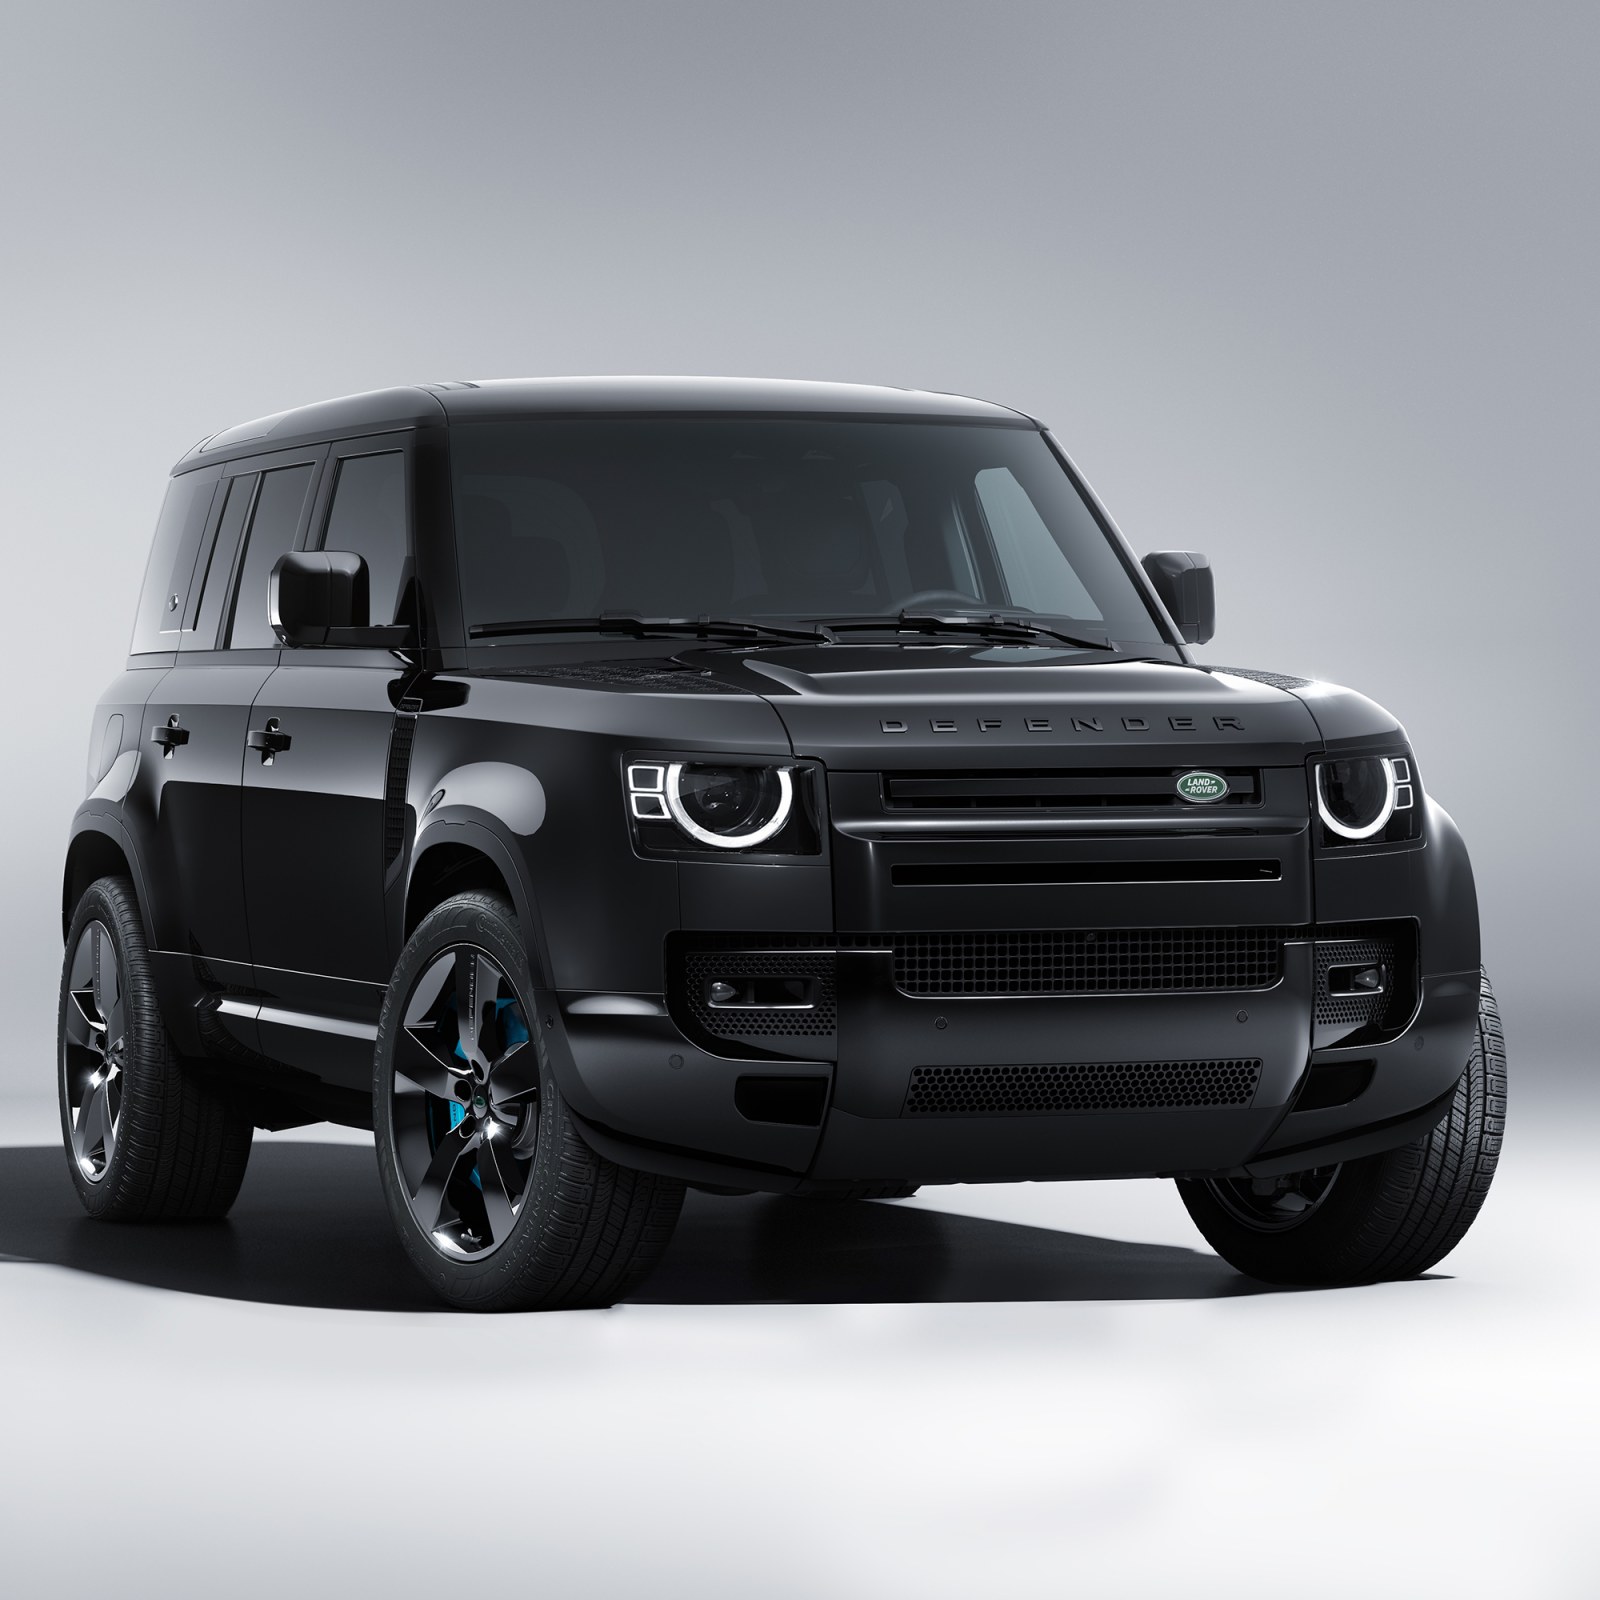 No Time to Die' Inspires Exclusive 2022 Land Rover Defender V8 Bond Edition